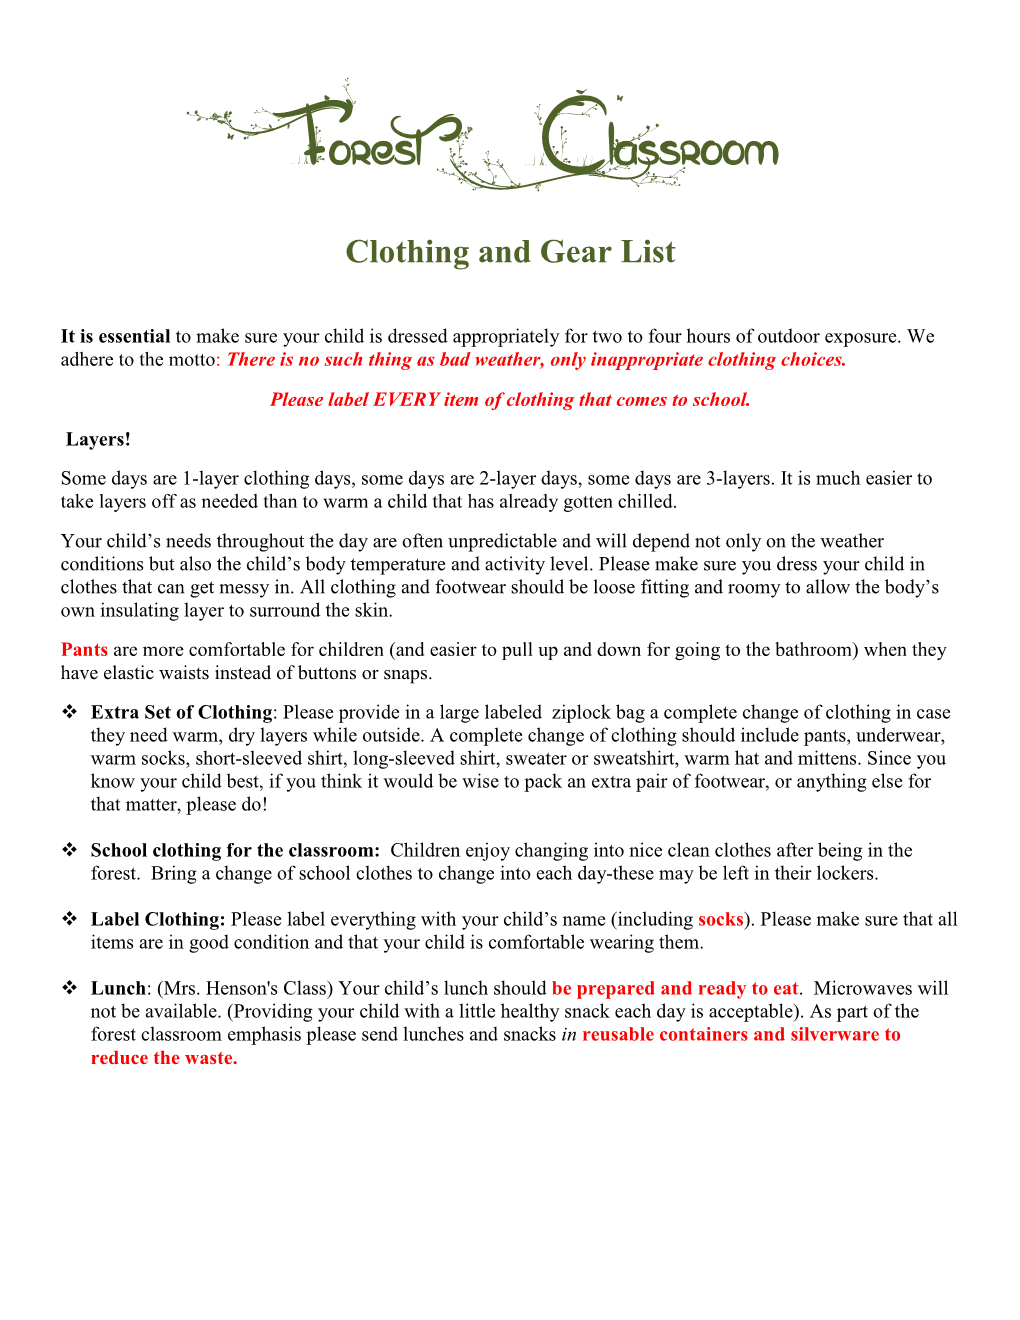 Forest Classroom Clothing and Gear List